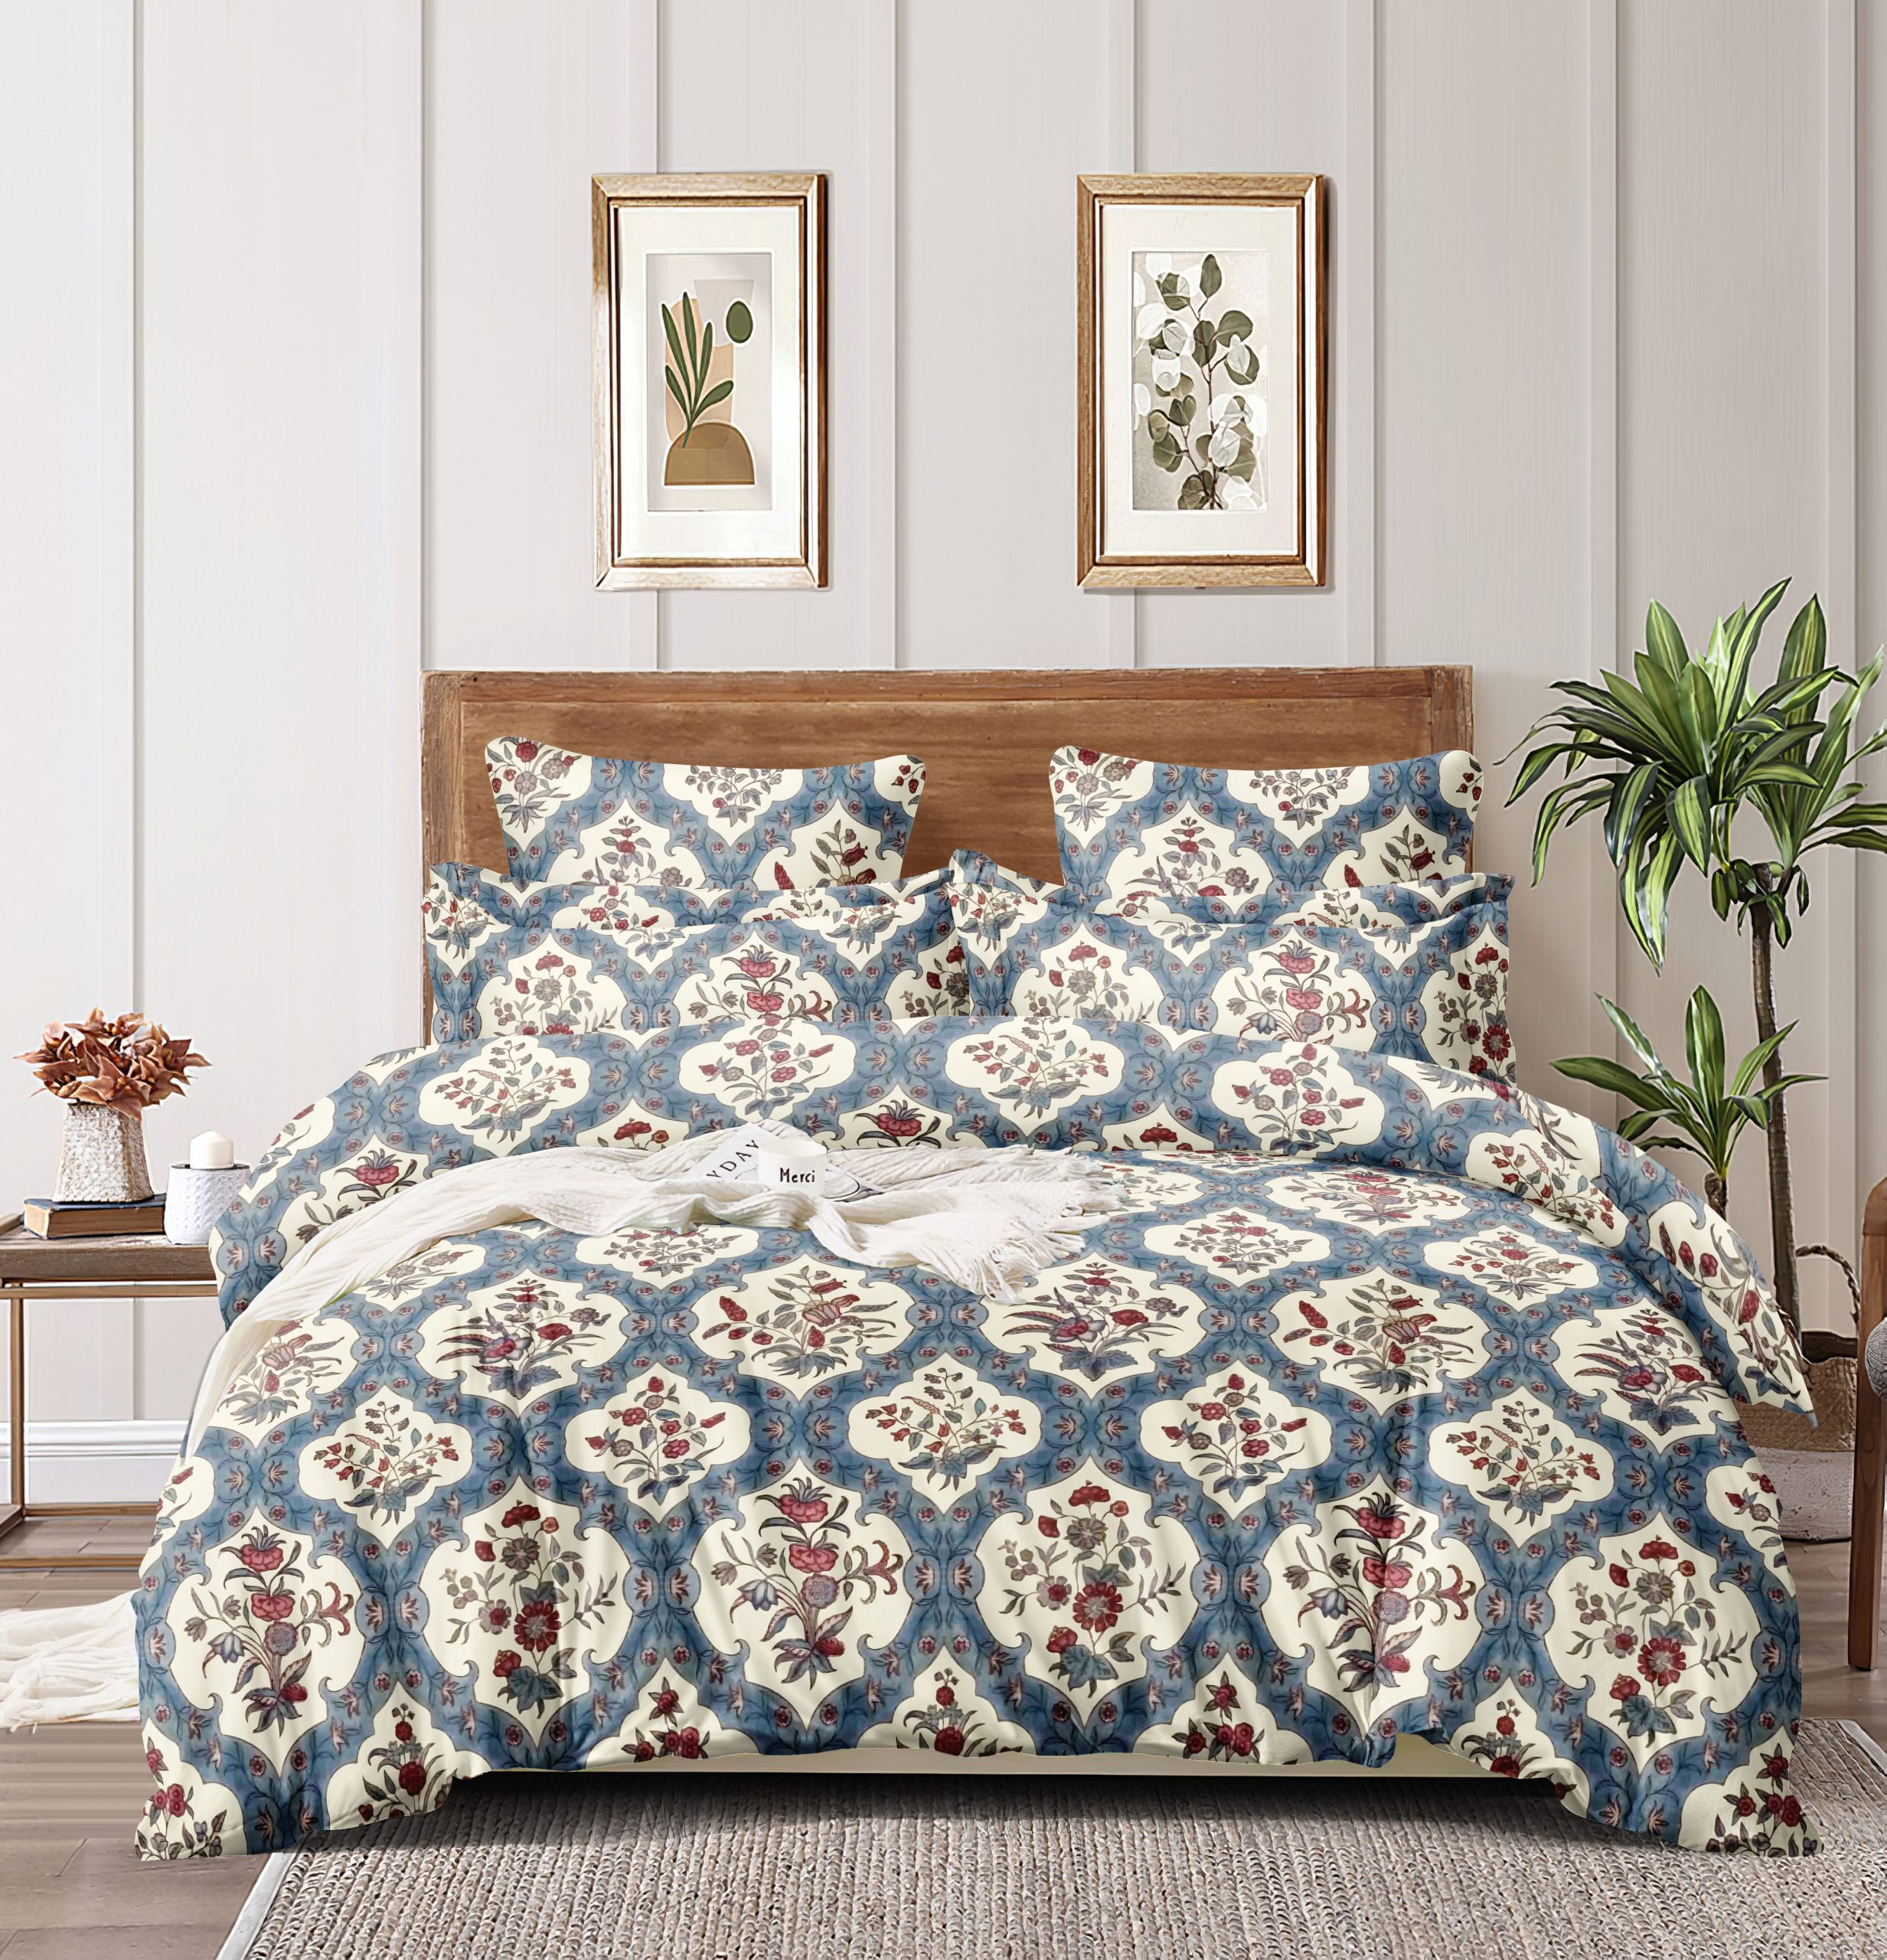 Homewards Mughal Jaal Pattern Double Bed Comforter – 100% Polyester, Ultra-Soft Handfeel, Color Fade Resistant